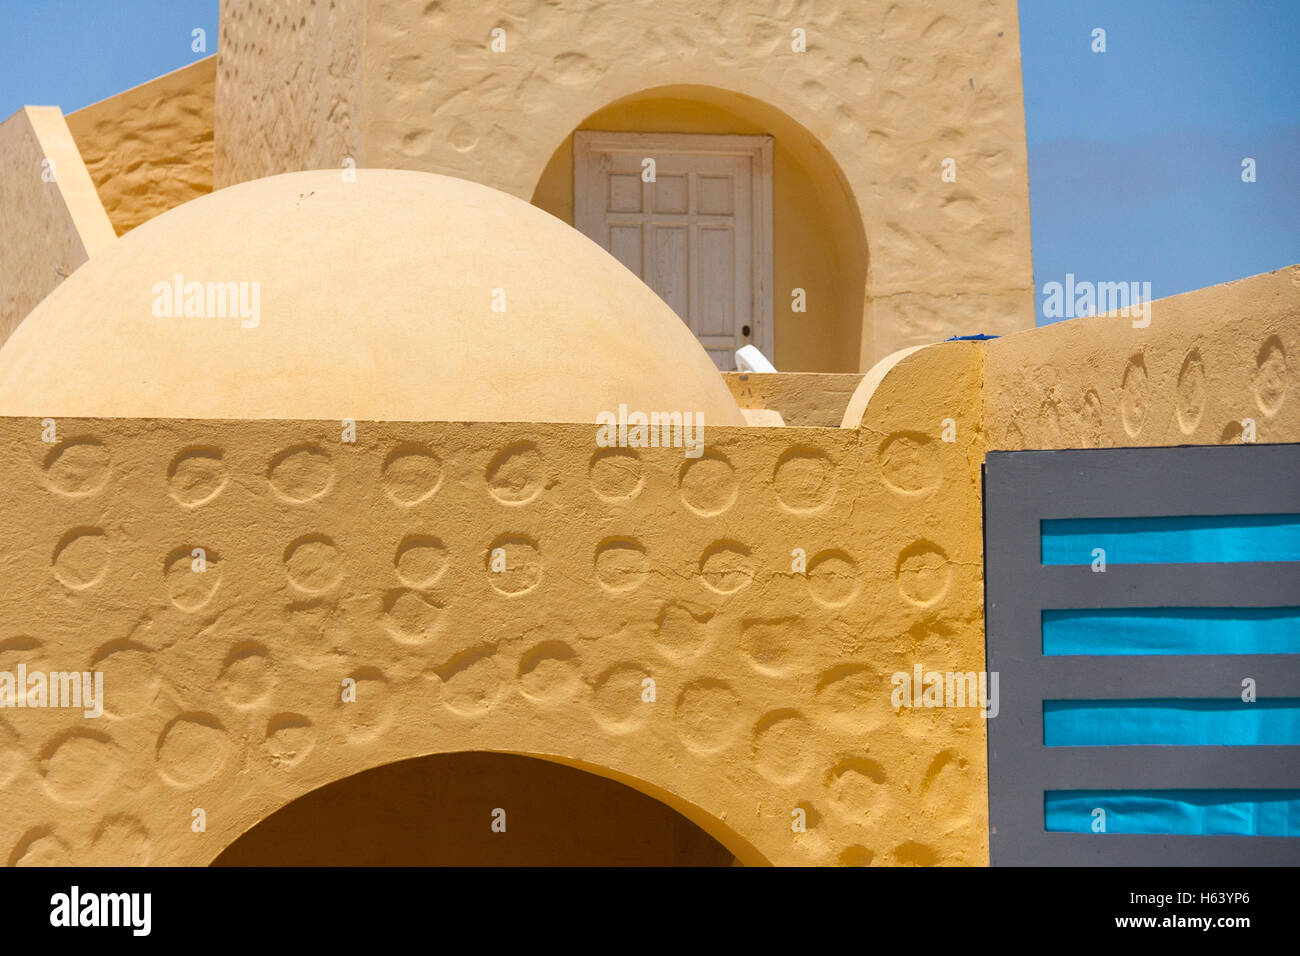 close up abstract detail of Tunisian architecture Stock Photo